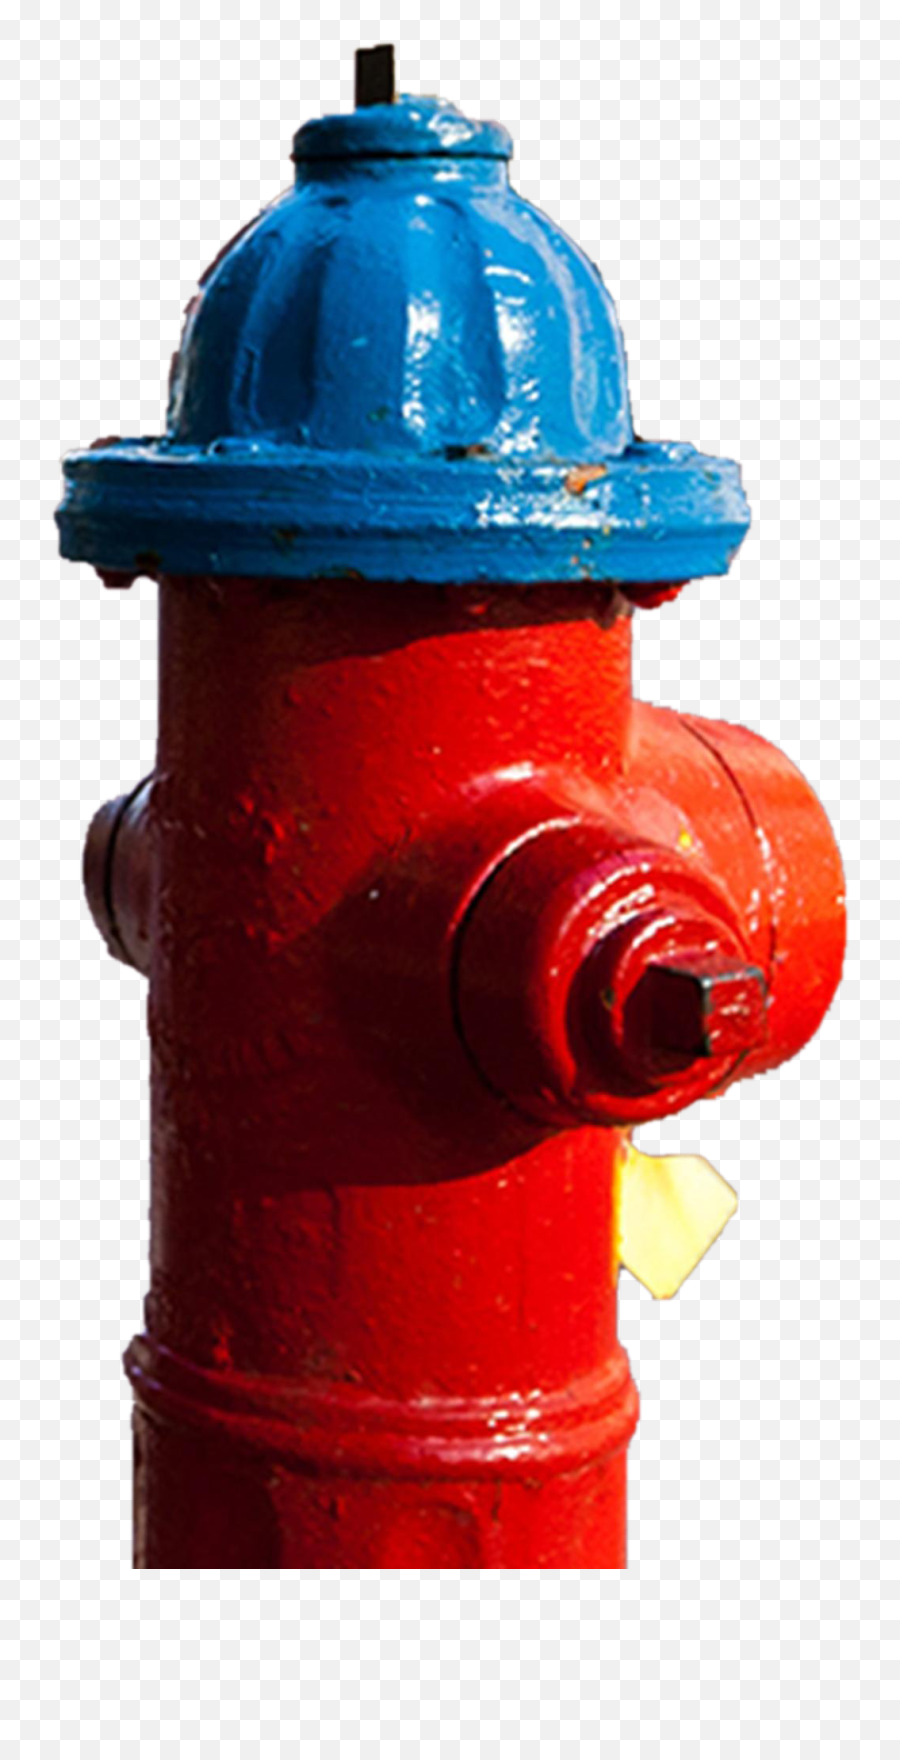 Red Fire Hydrant Background Png Image Play - Hidrante De Bomberos,Blue Fire Transparent Background